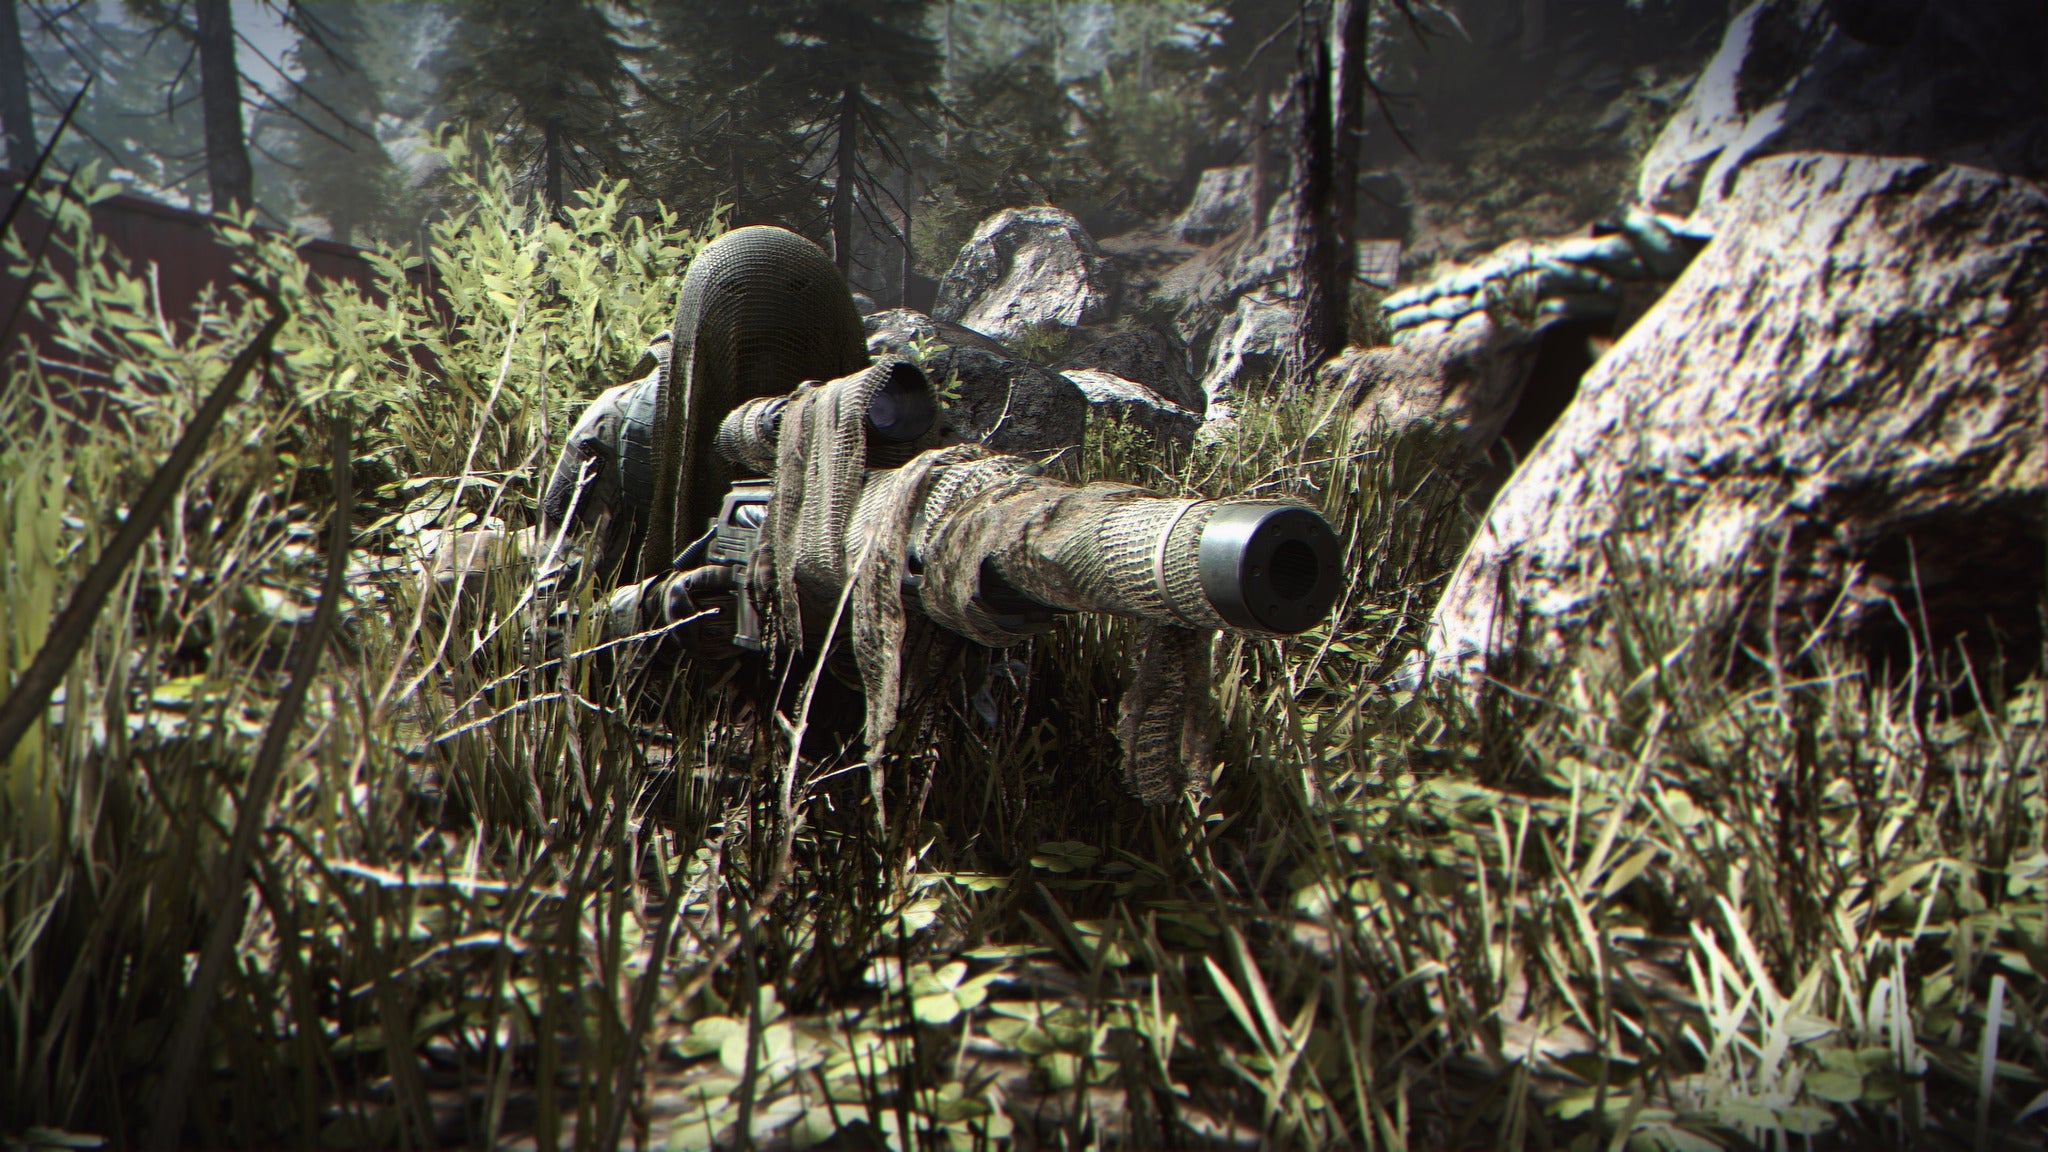 Image for Call of Duty: Modern Warfare has a real shot at swaying Battlefield fans, but it needs to evolve past its own community's expectations